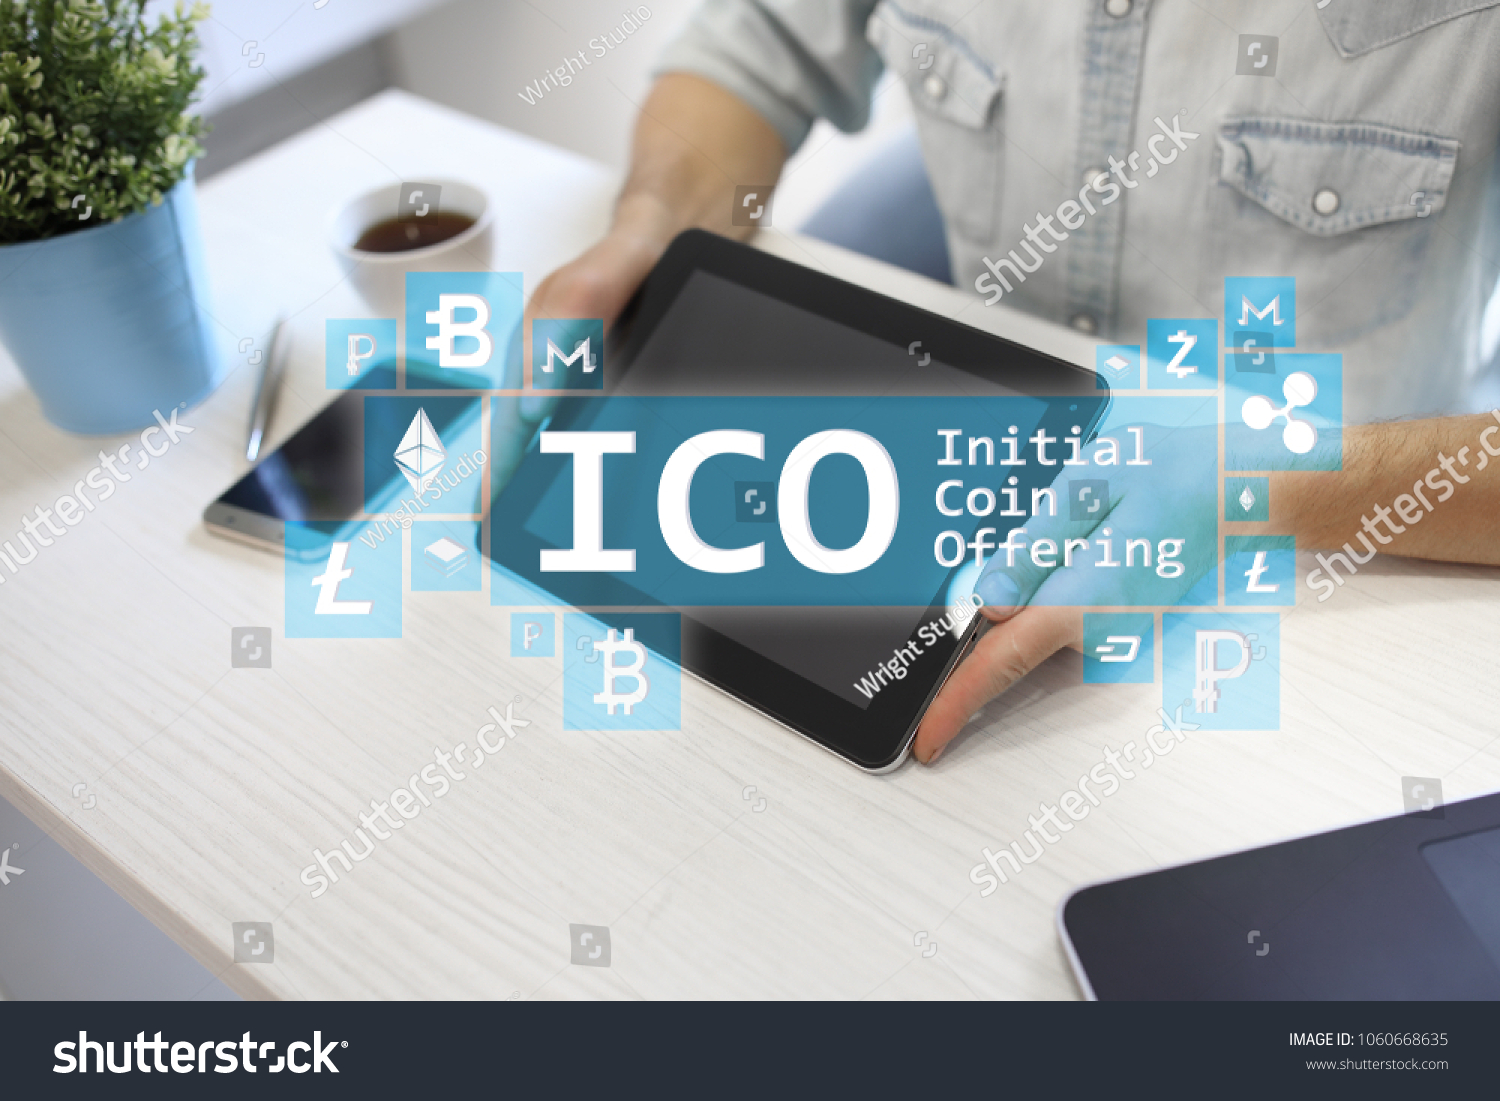 Ico Initial Coin Offering Cryptocurrency Digital Stock Photo Edit - 